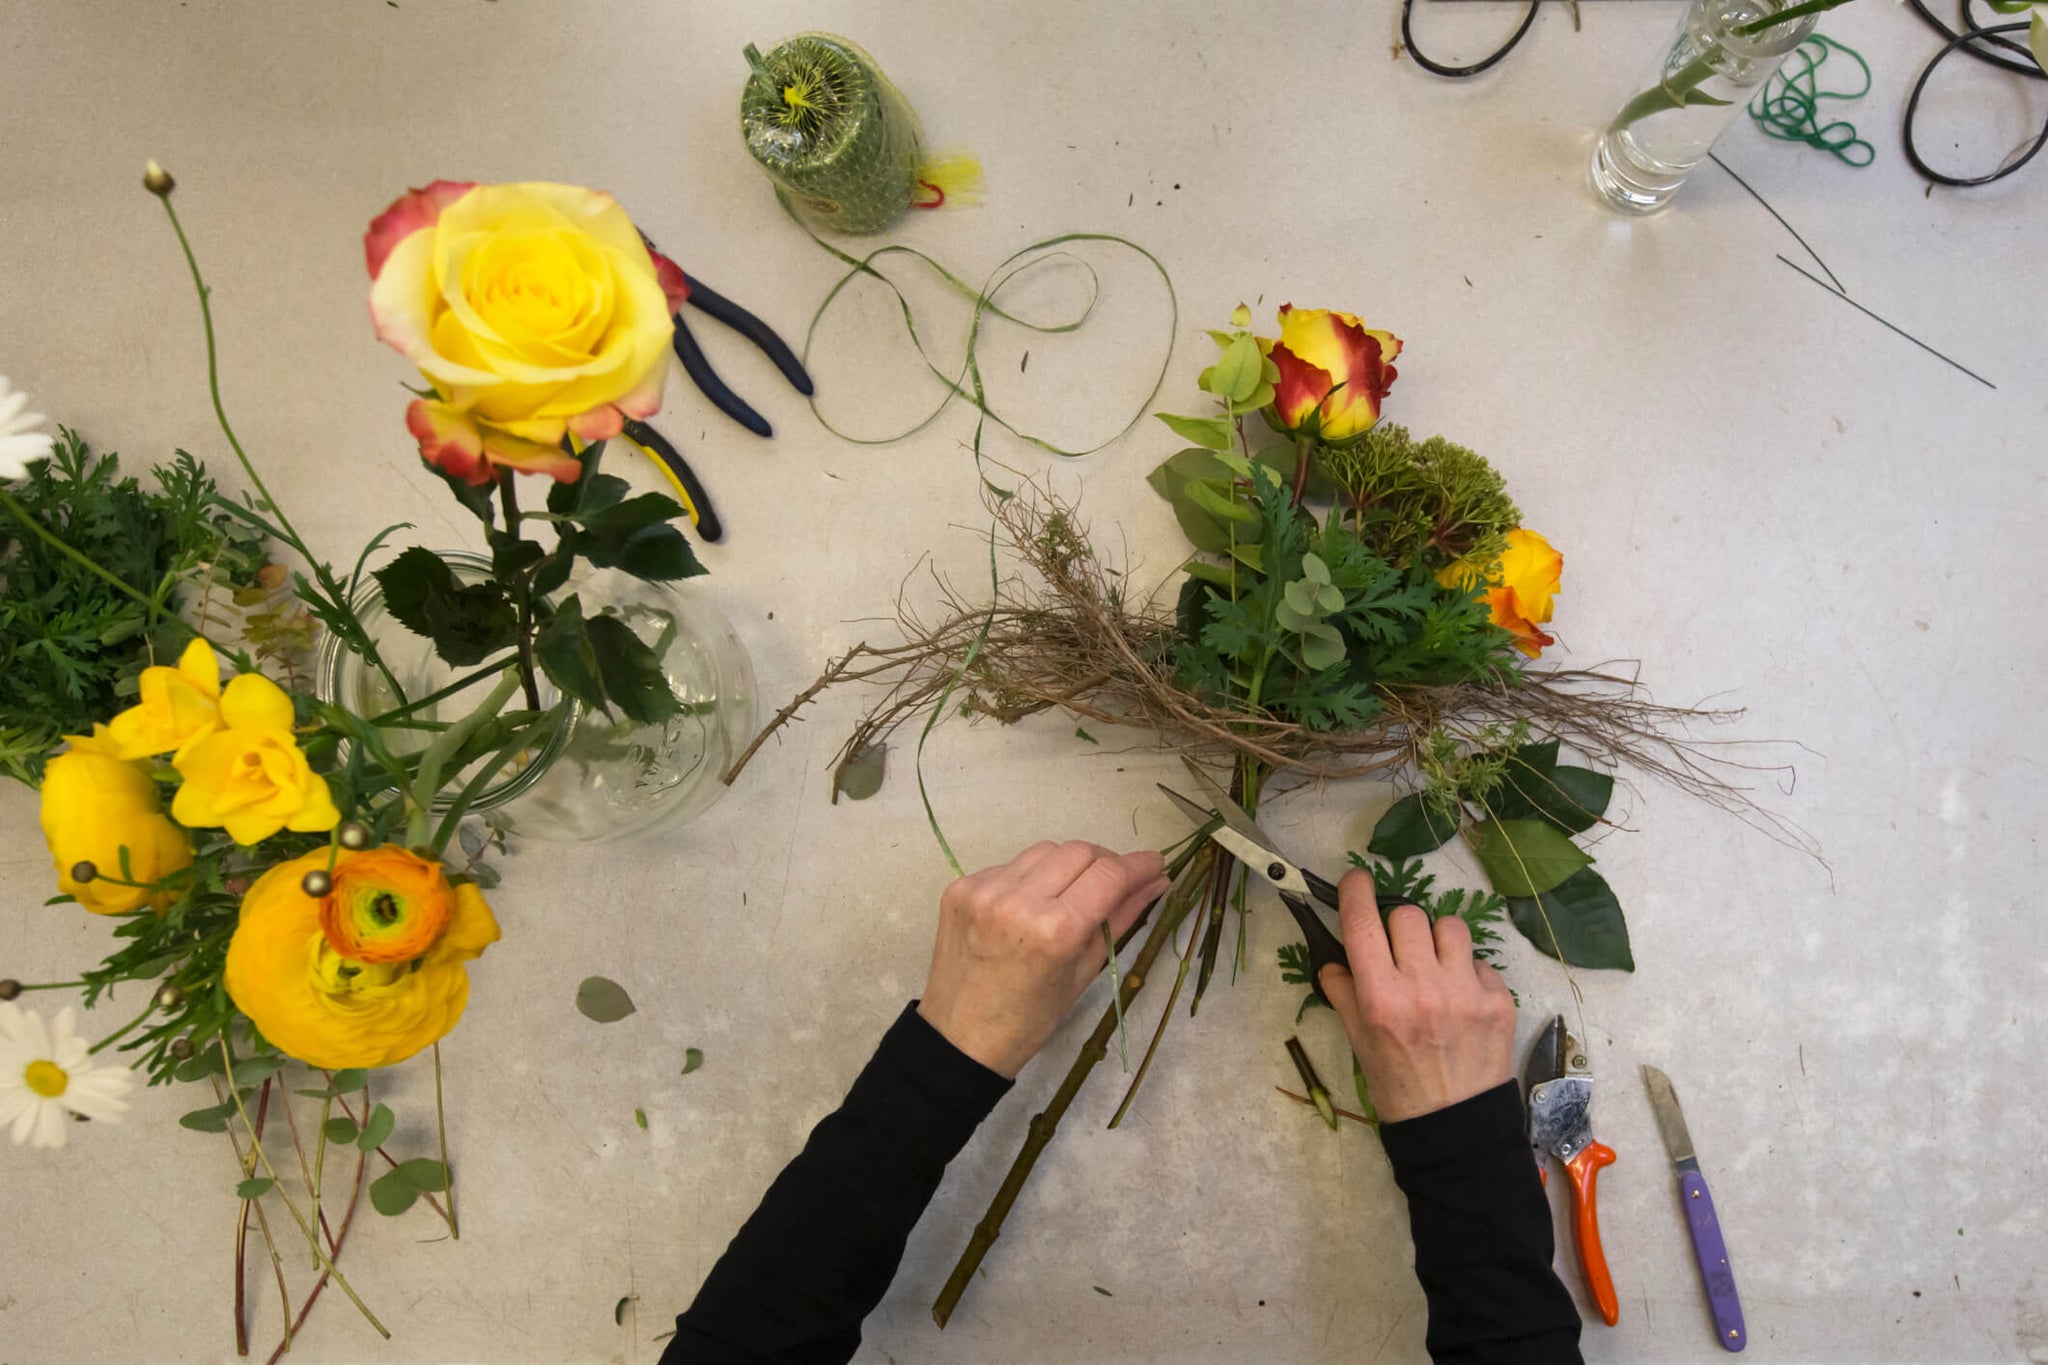 Person arranging flowers with the longest stem in the middle.